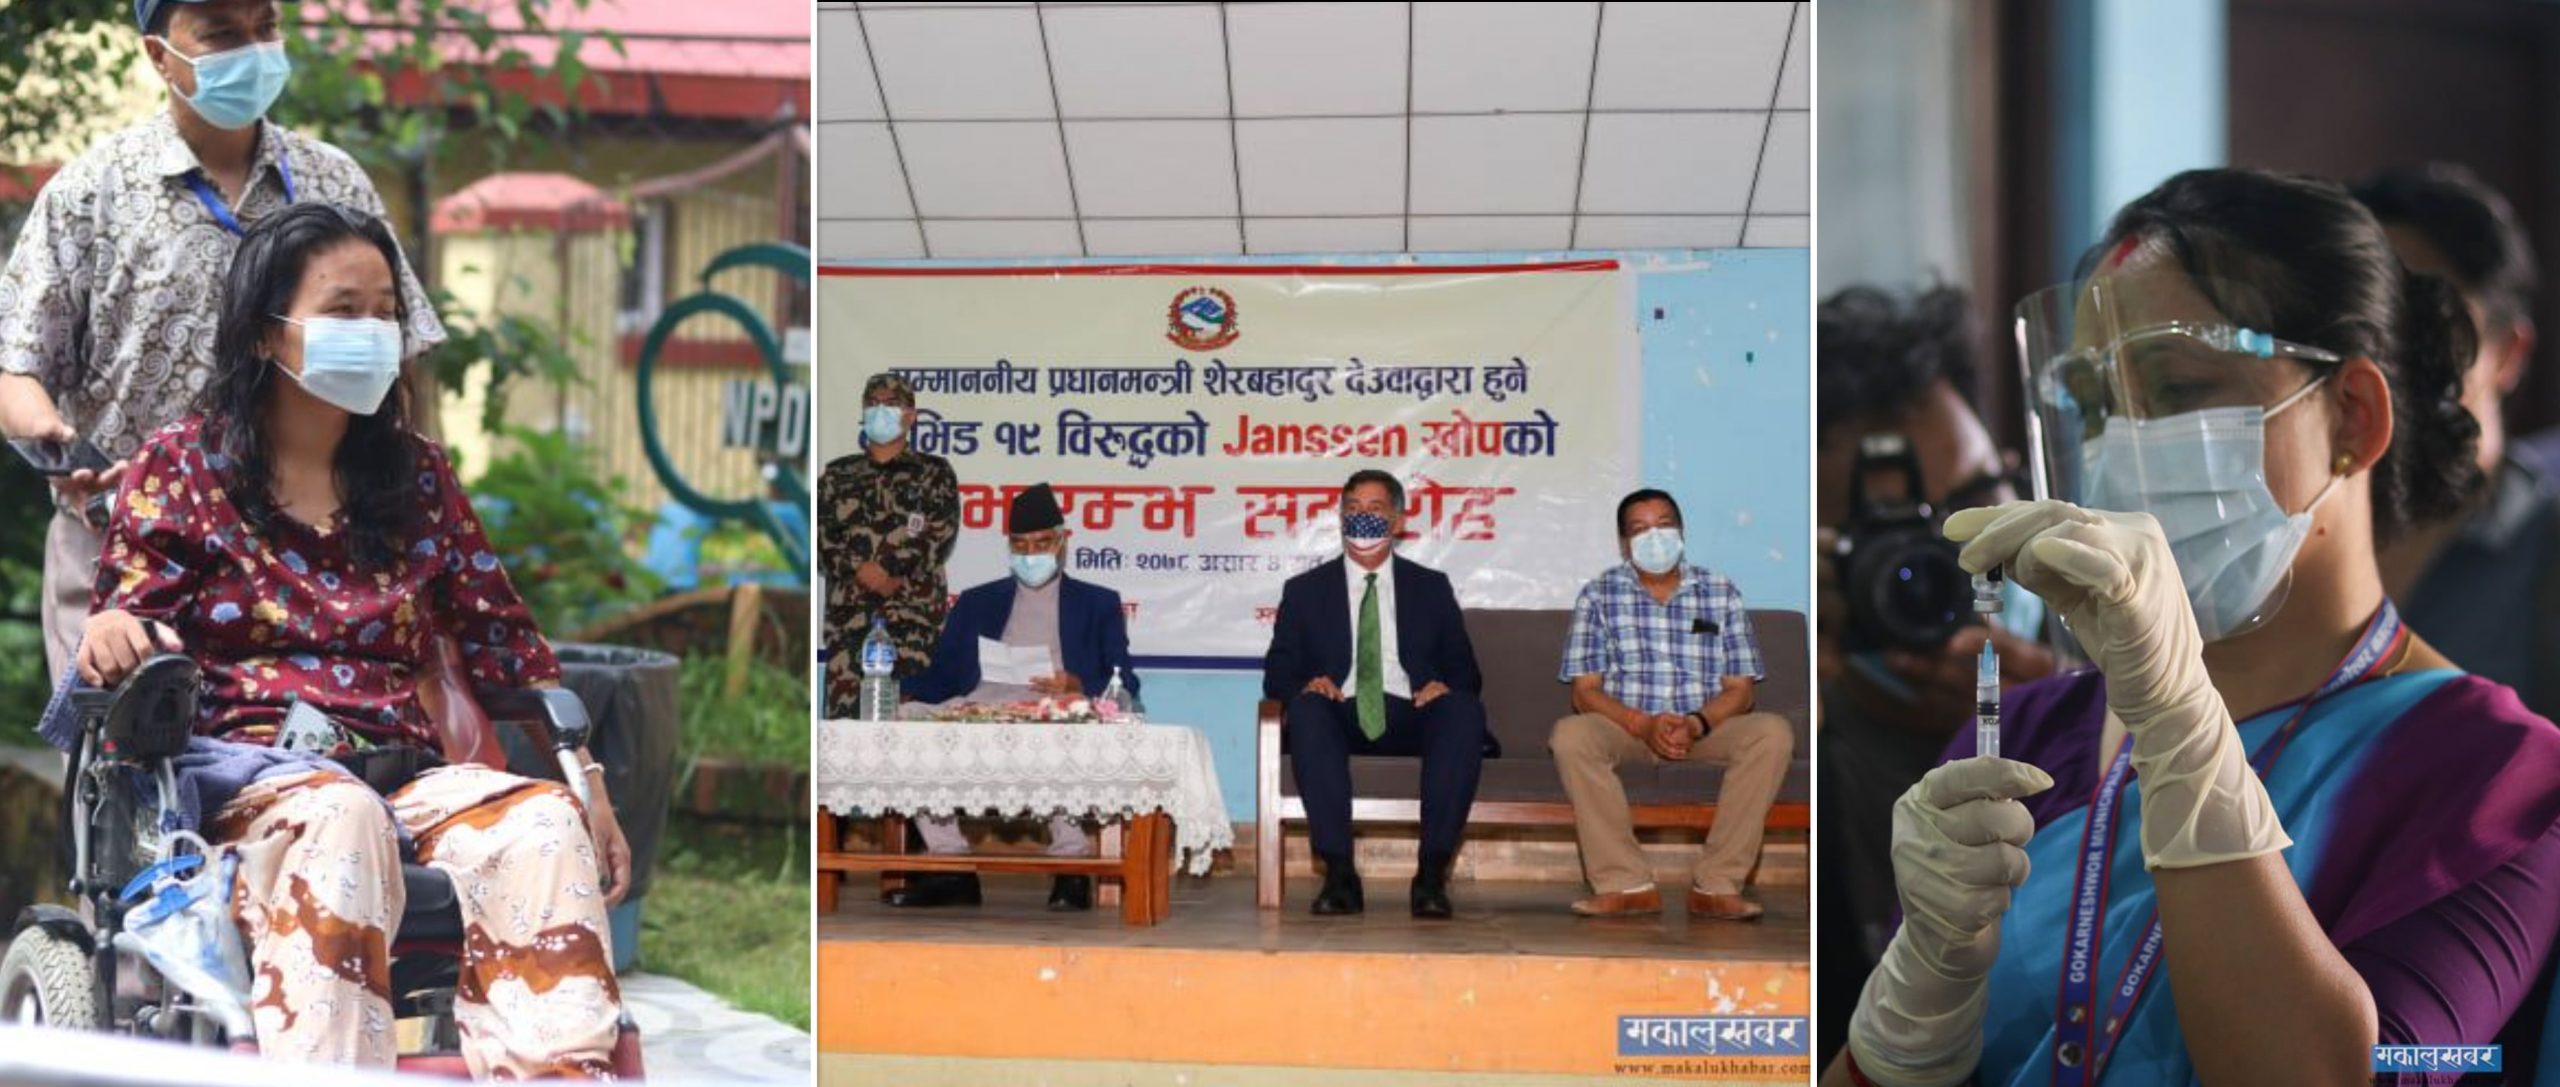 Vaccination Program Launched by Prime Minister Deuba and US Ambassador Berry [Photos]